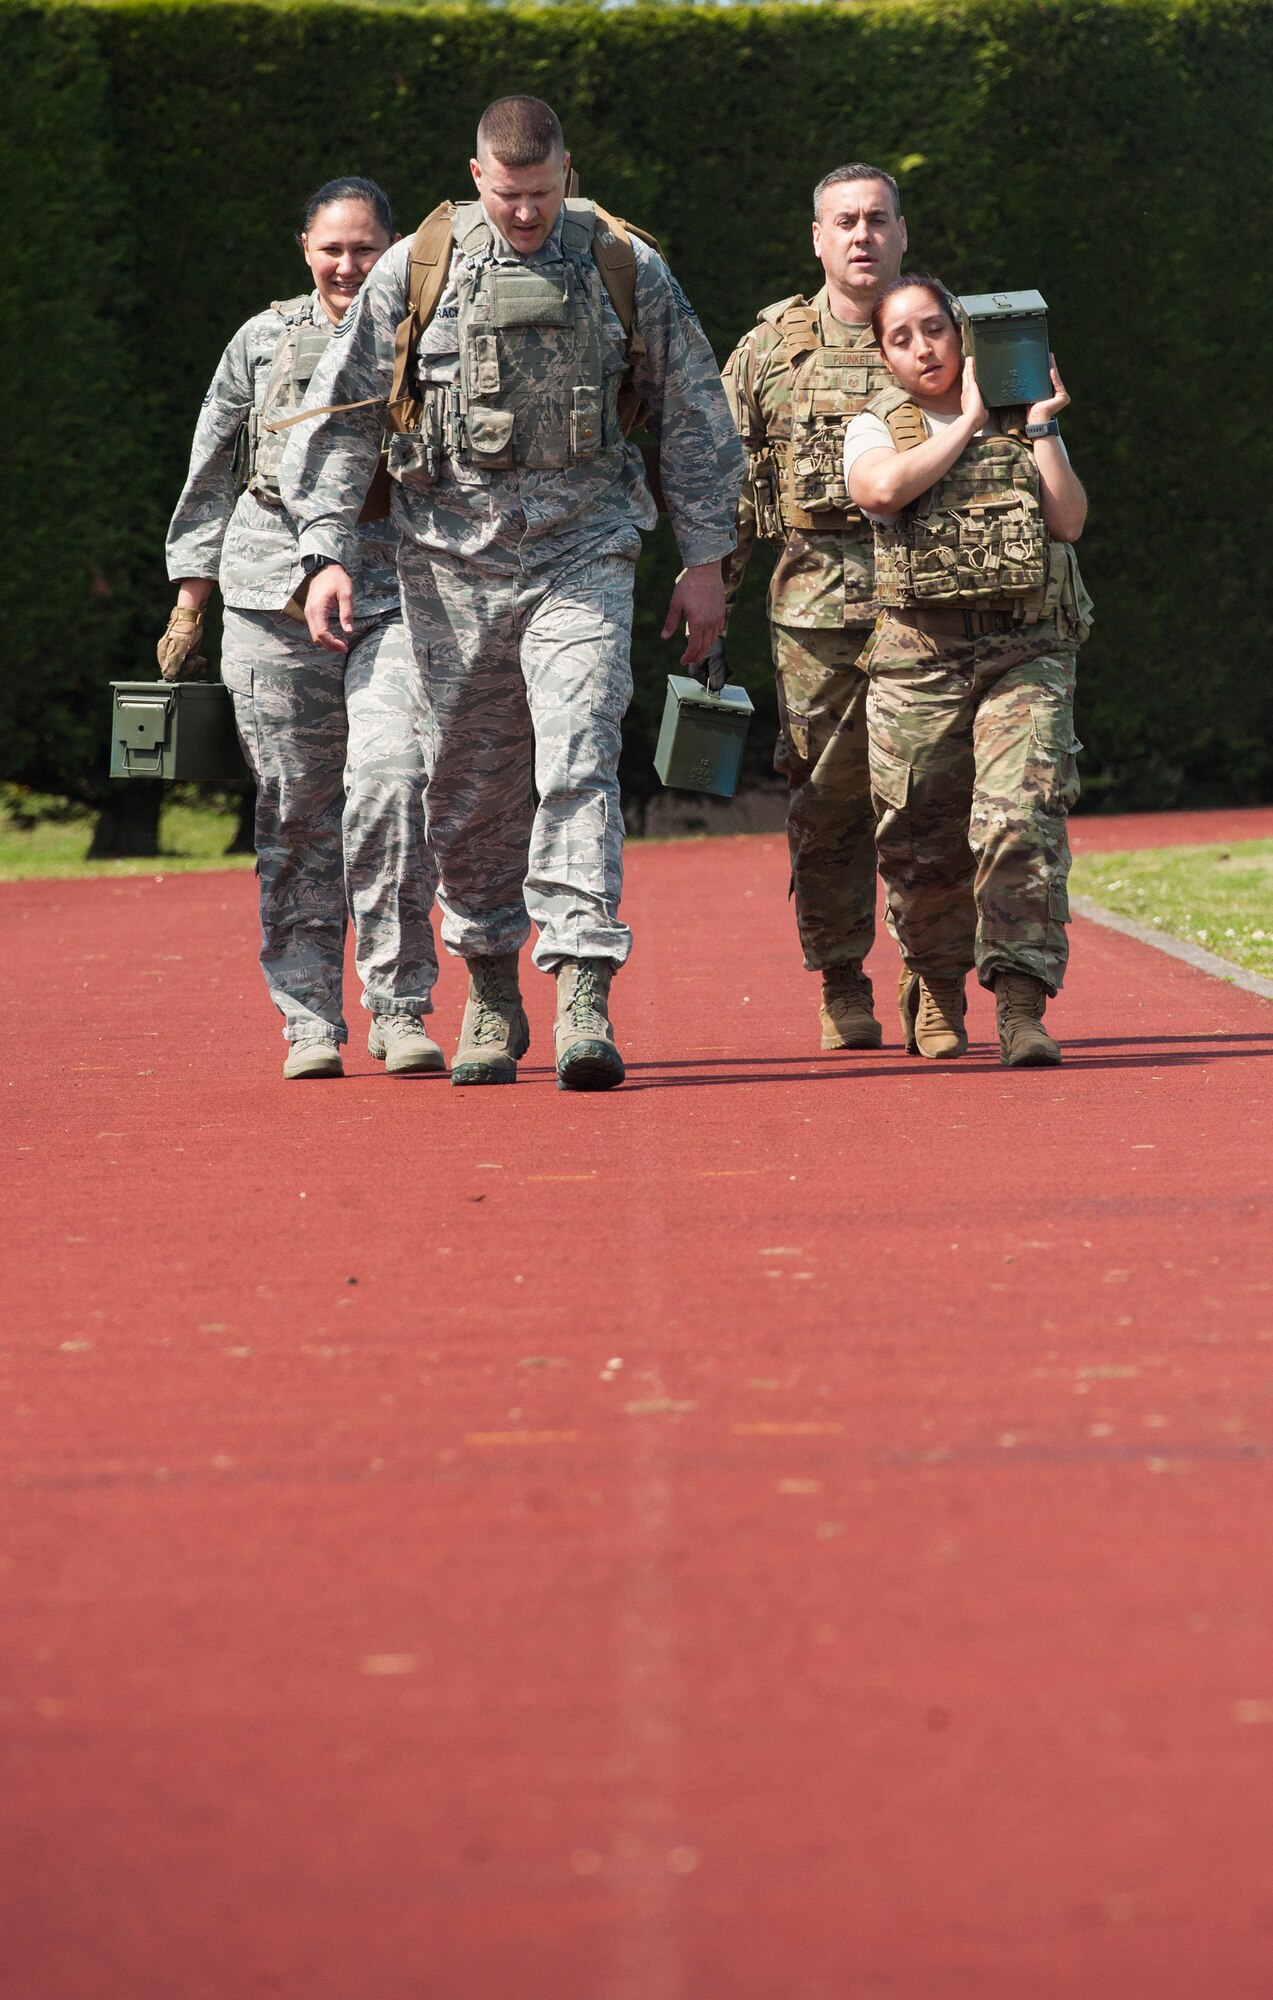 U.S. Air Force Defenders with the 423rd Security Forces Squadron, carry ammo cans and a ruck as a four person team during a Police Week Defenders Challenge at RAF Alconbury, England on May 15, 2019. Police Week occurs each year across the peace officer community as a way of remembrance of those that have served in law enforcement and those that paid have the ultimate sacrifice. (U.S. Air Force photo by MSgt. Brian Kimball)